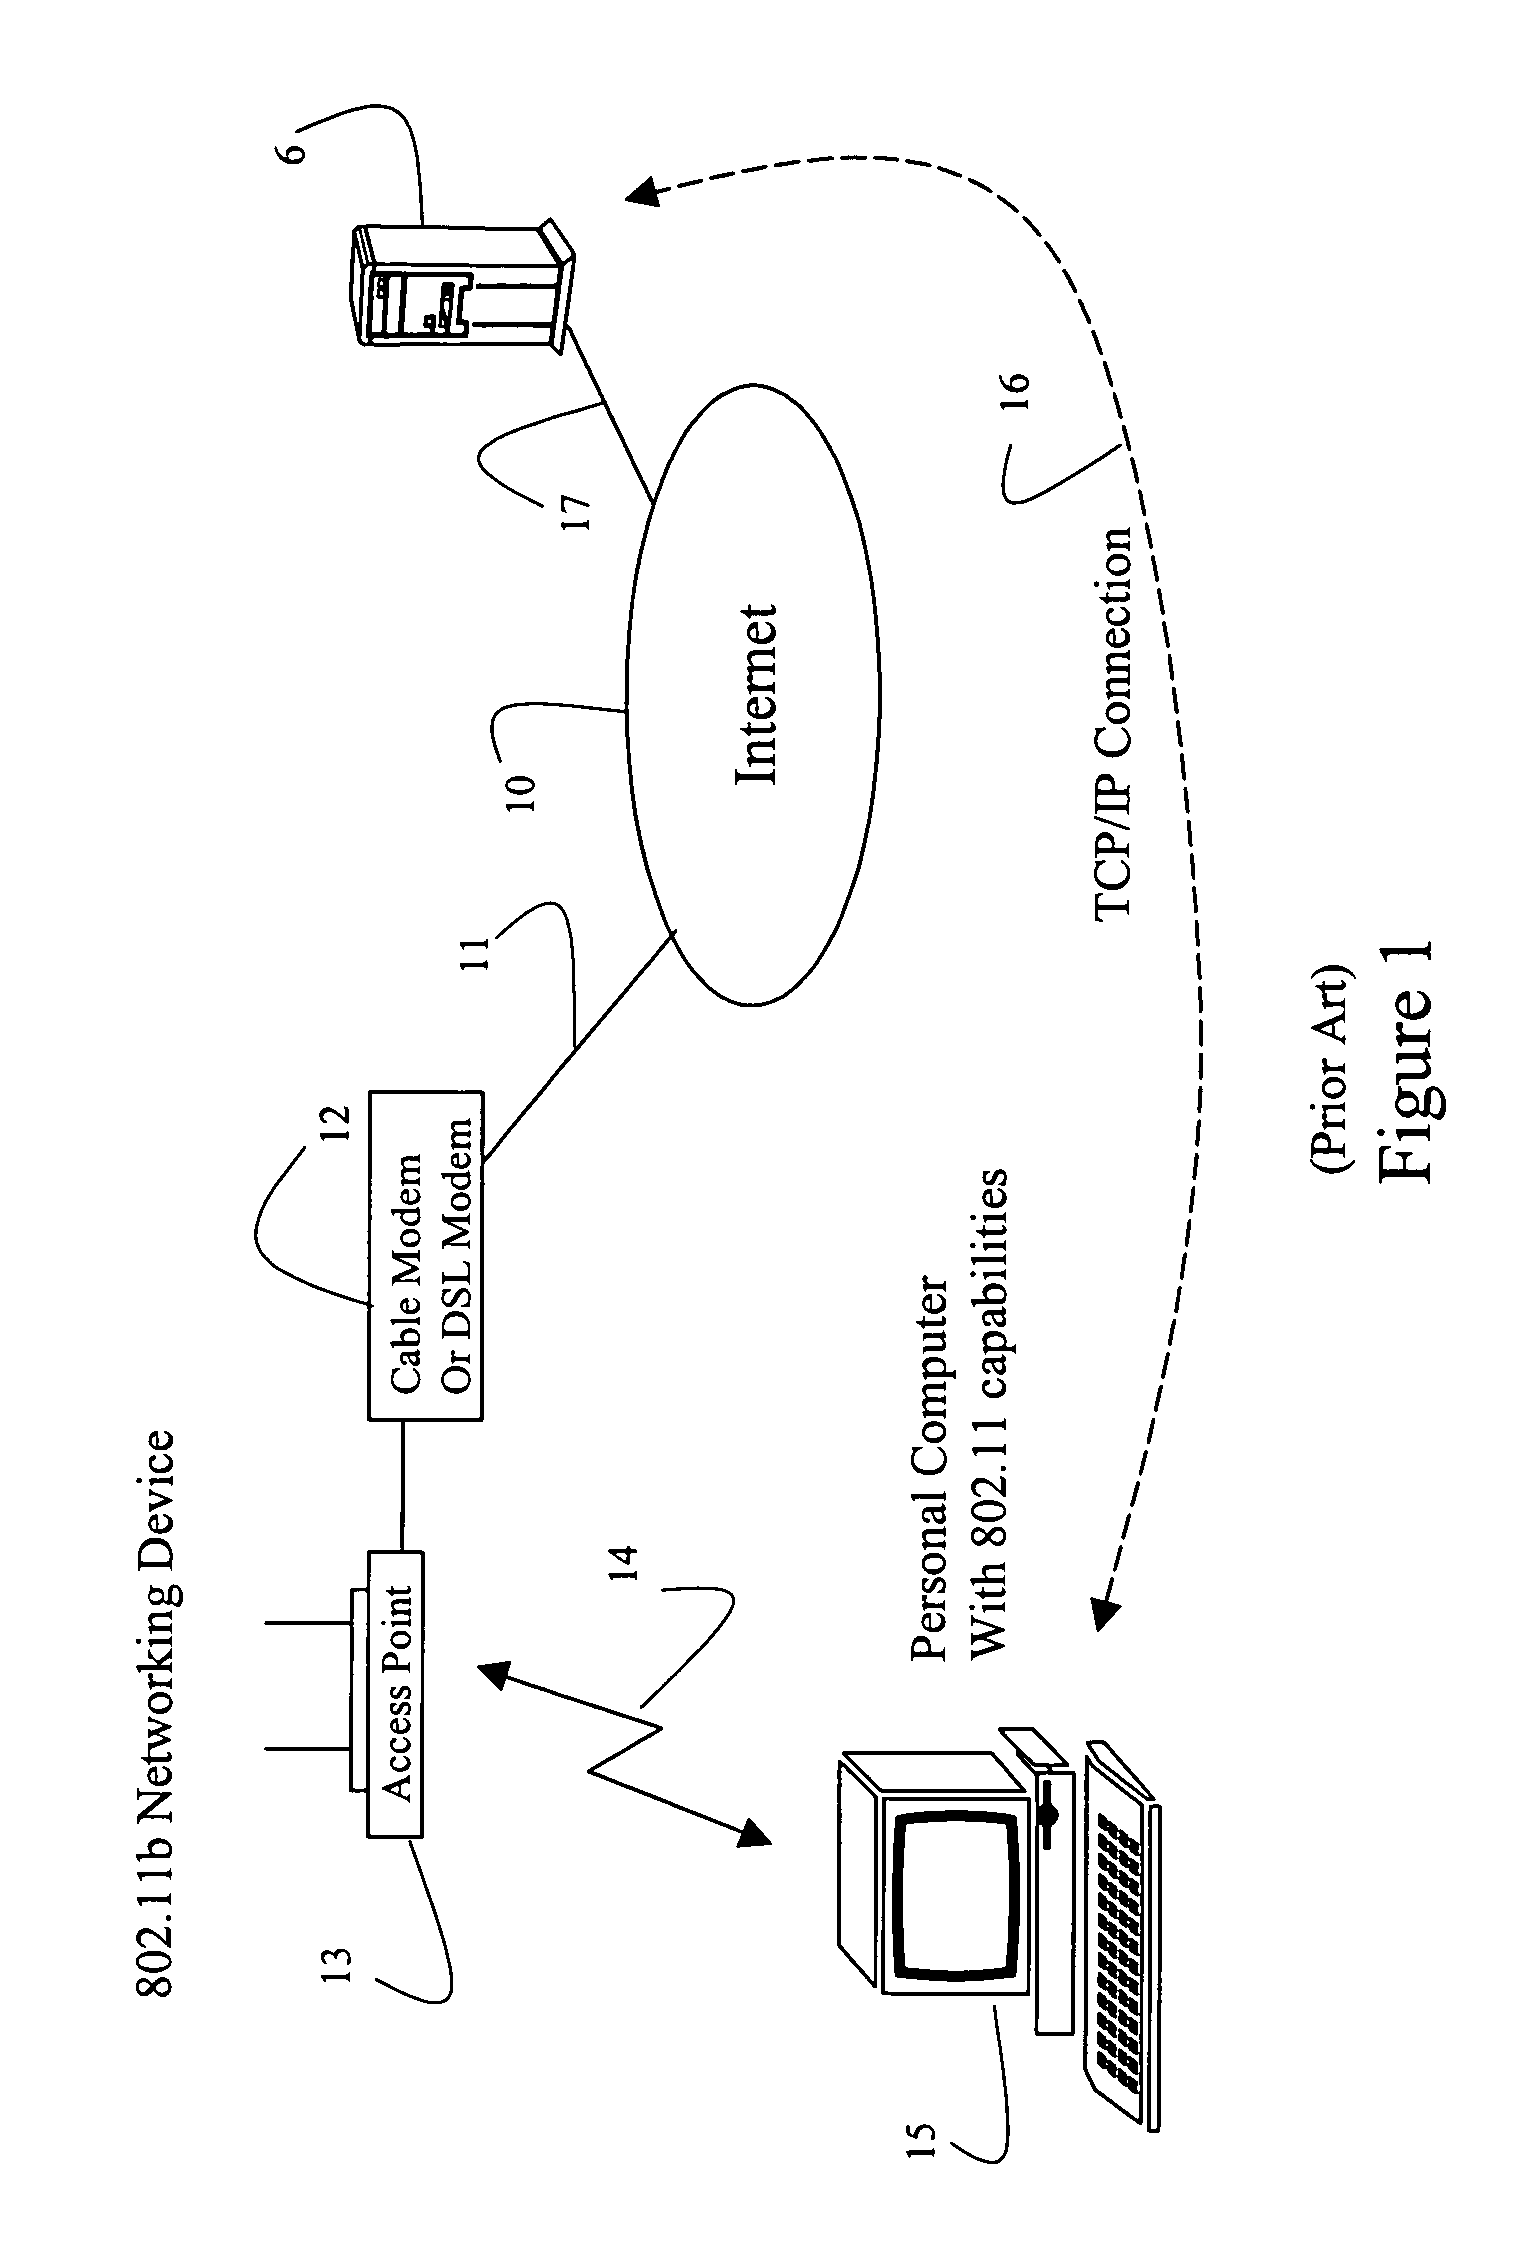 Systems and methods for remote power management using IEEE 802 based wireless communication links